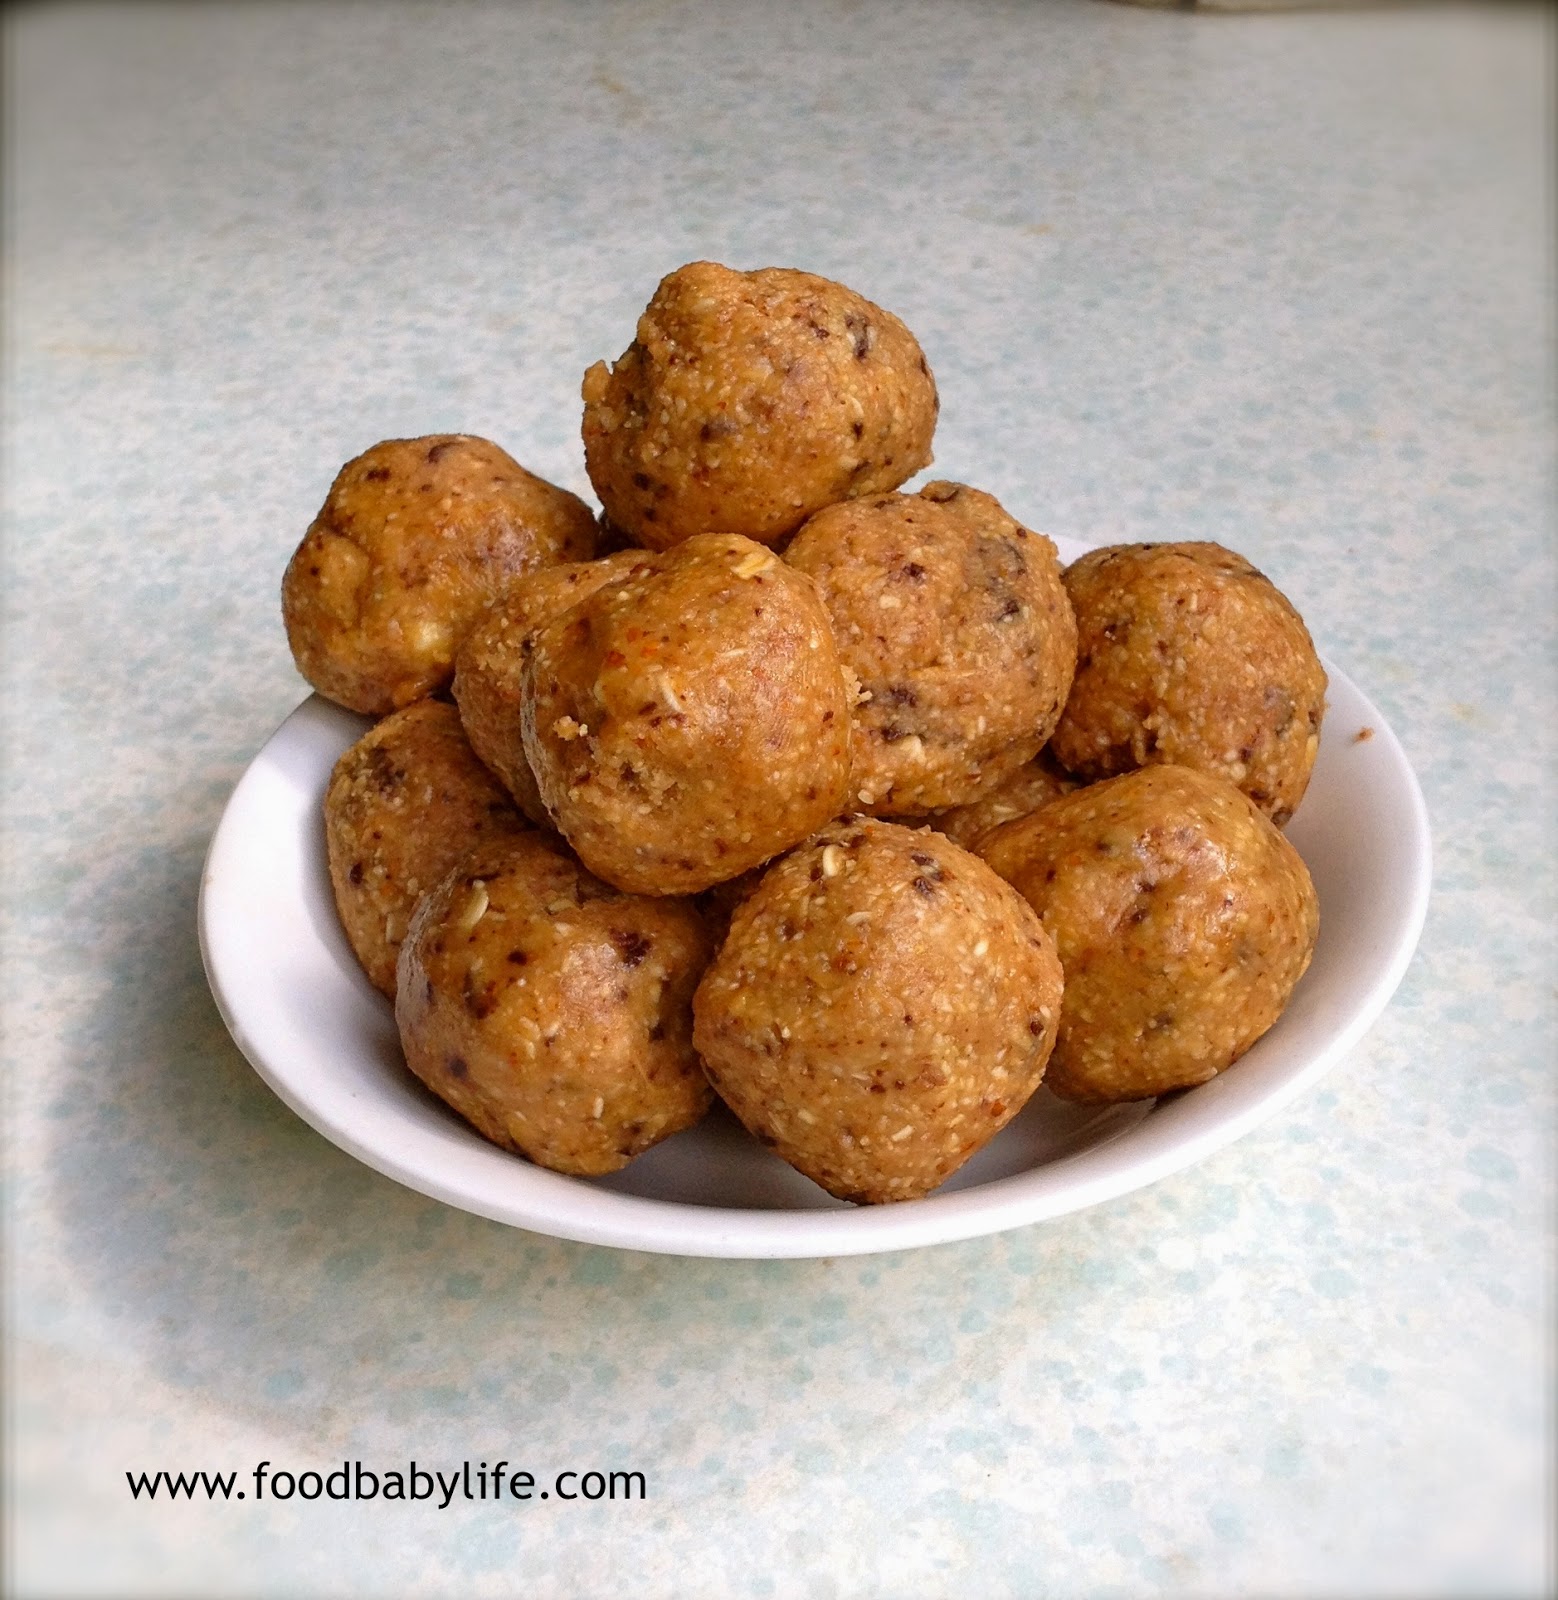 Peanut Butter Chocolate Chip Cookie Dough Balls © www.foodbabylife.com